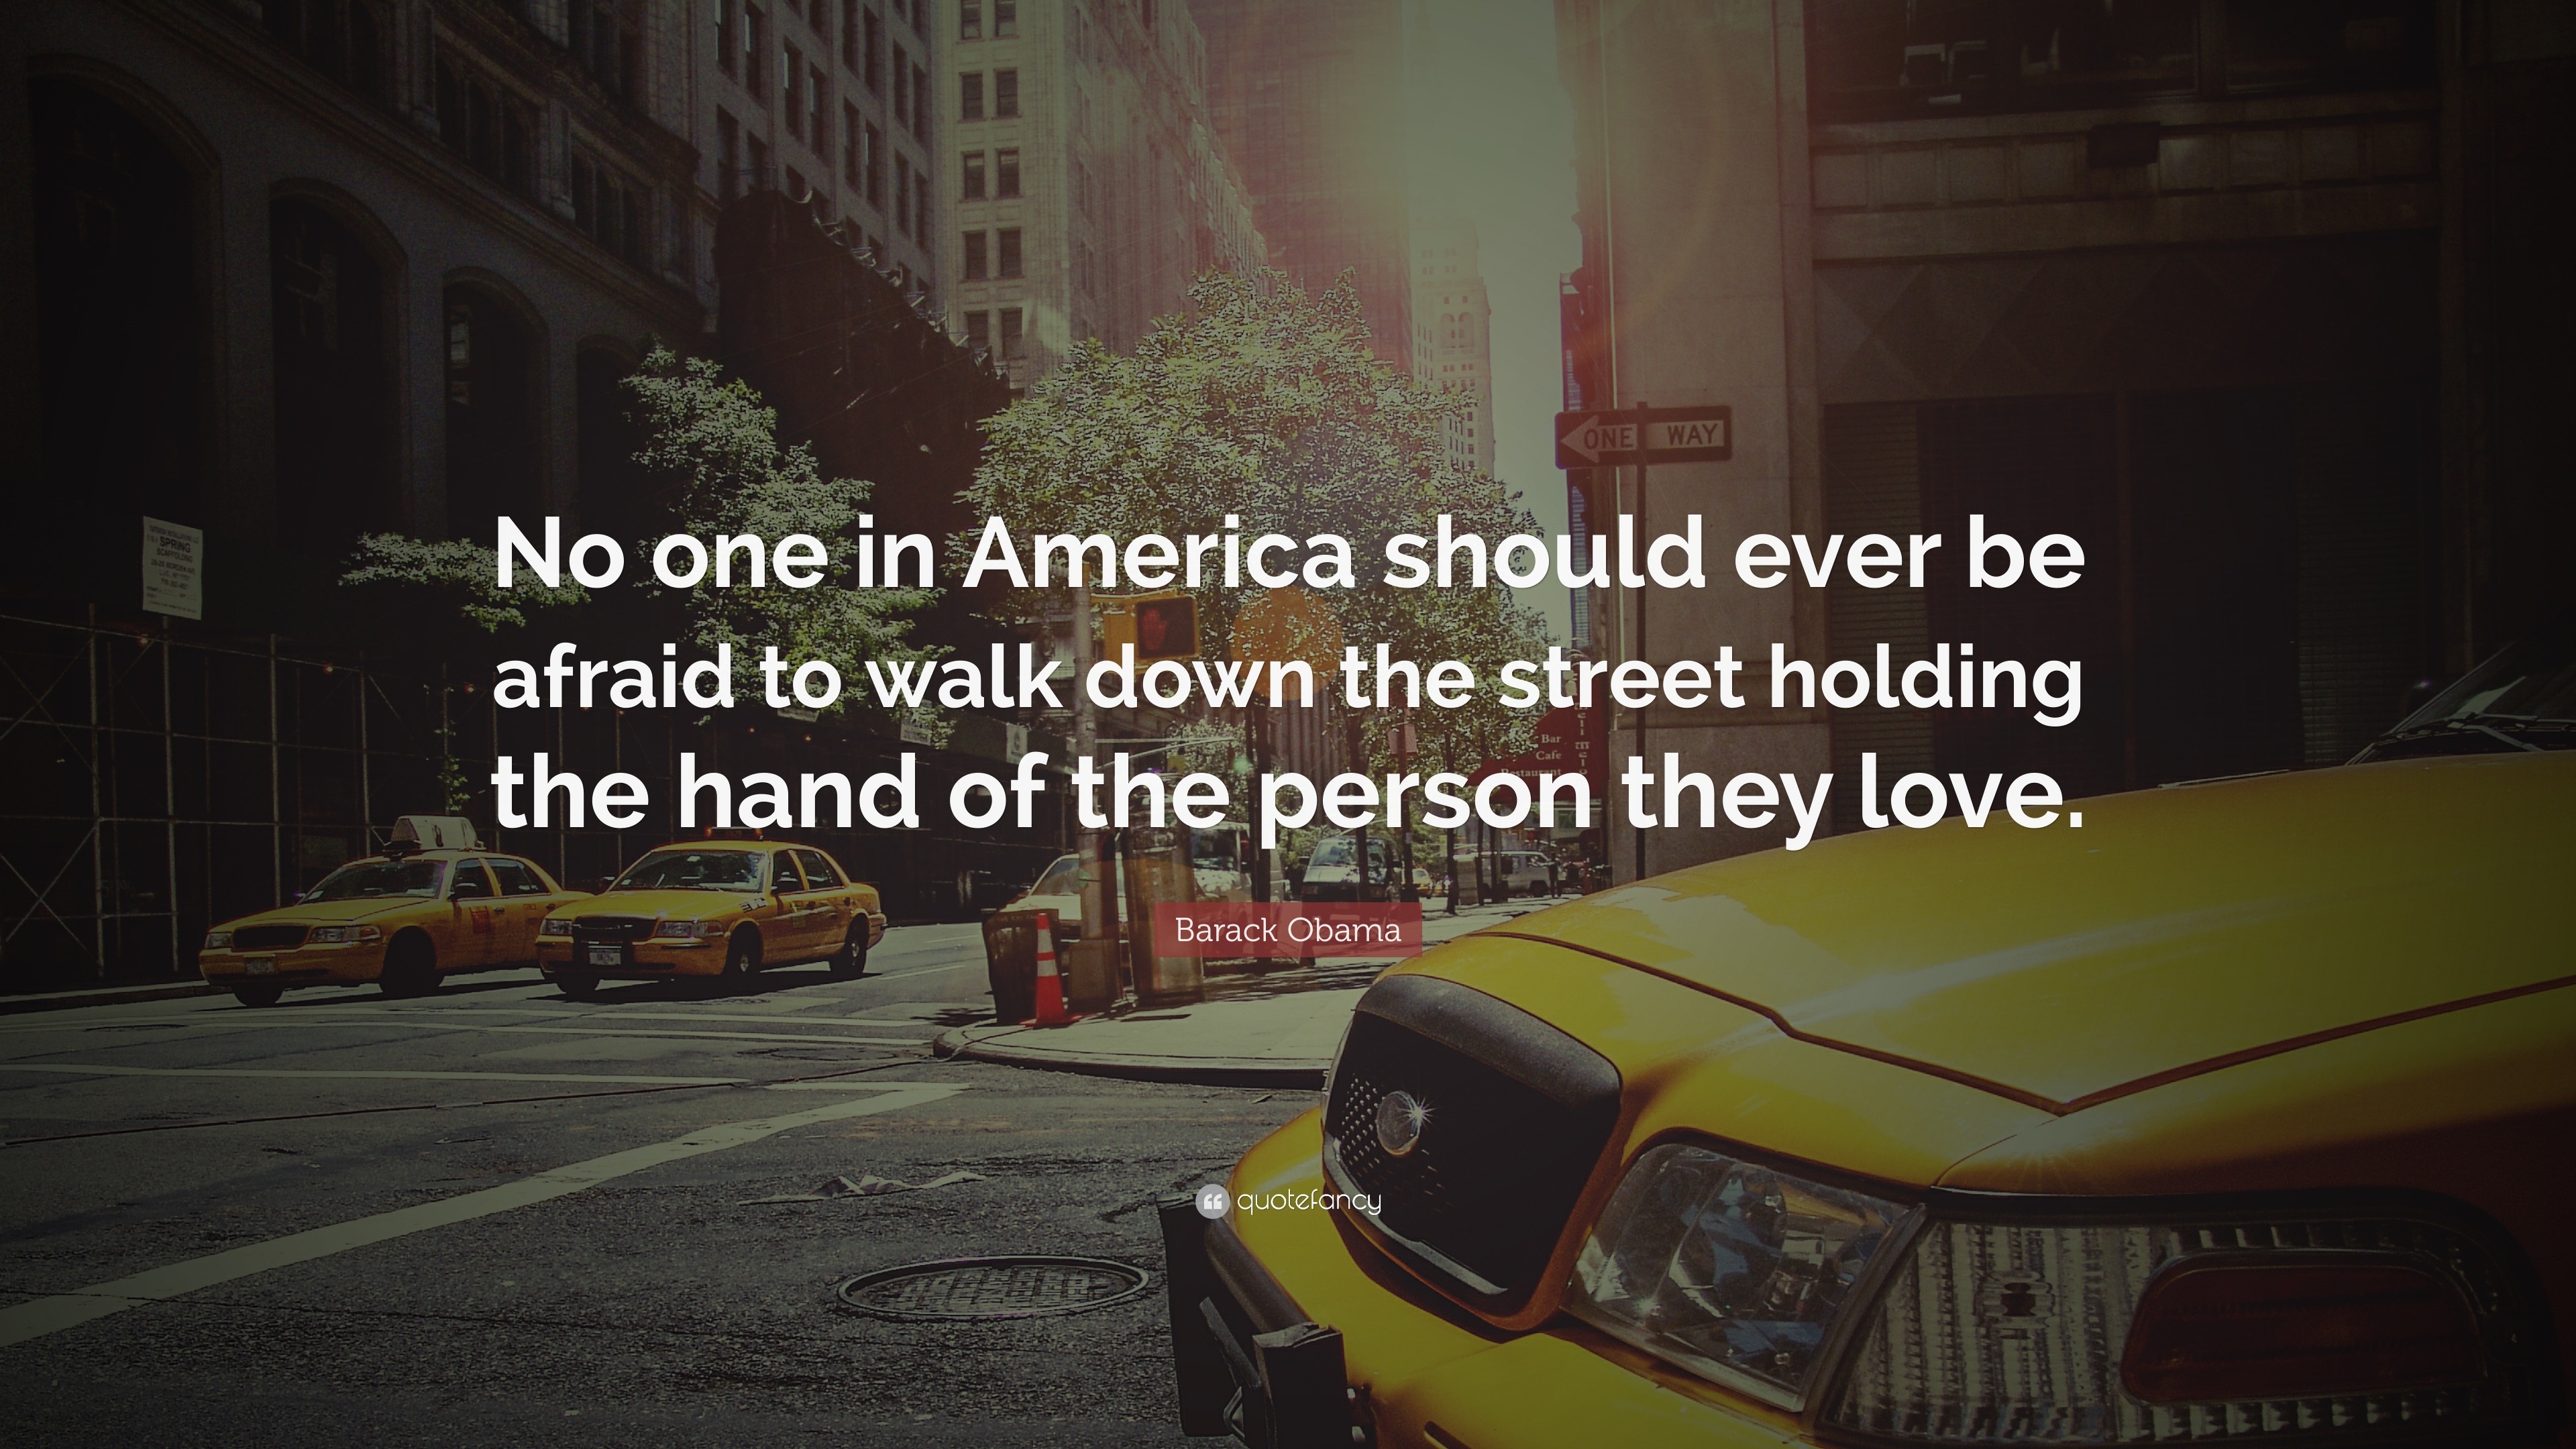 Barack Obama Quote “No one in America should ever be afraid to walk down